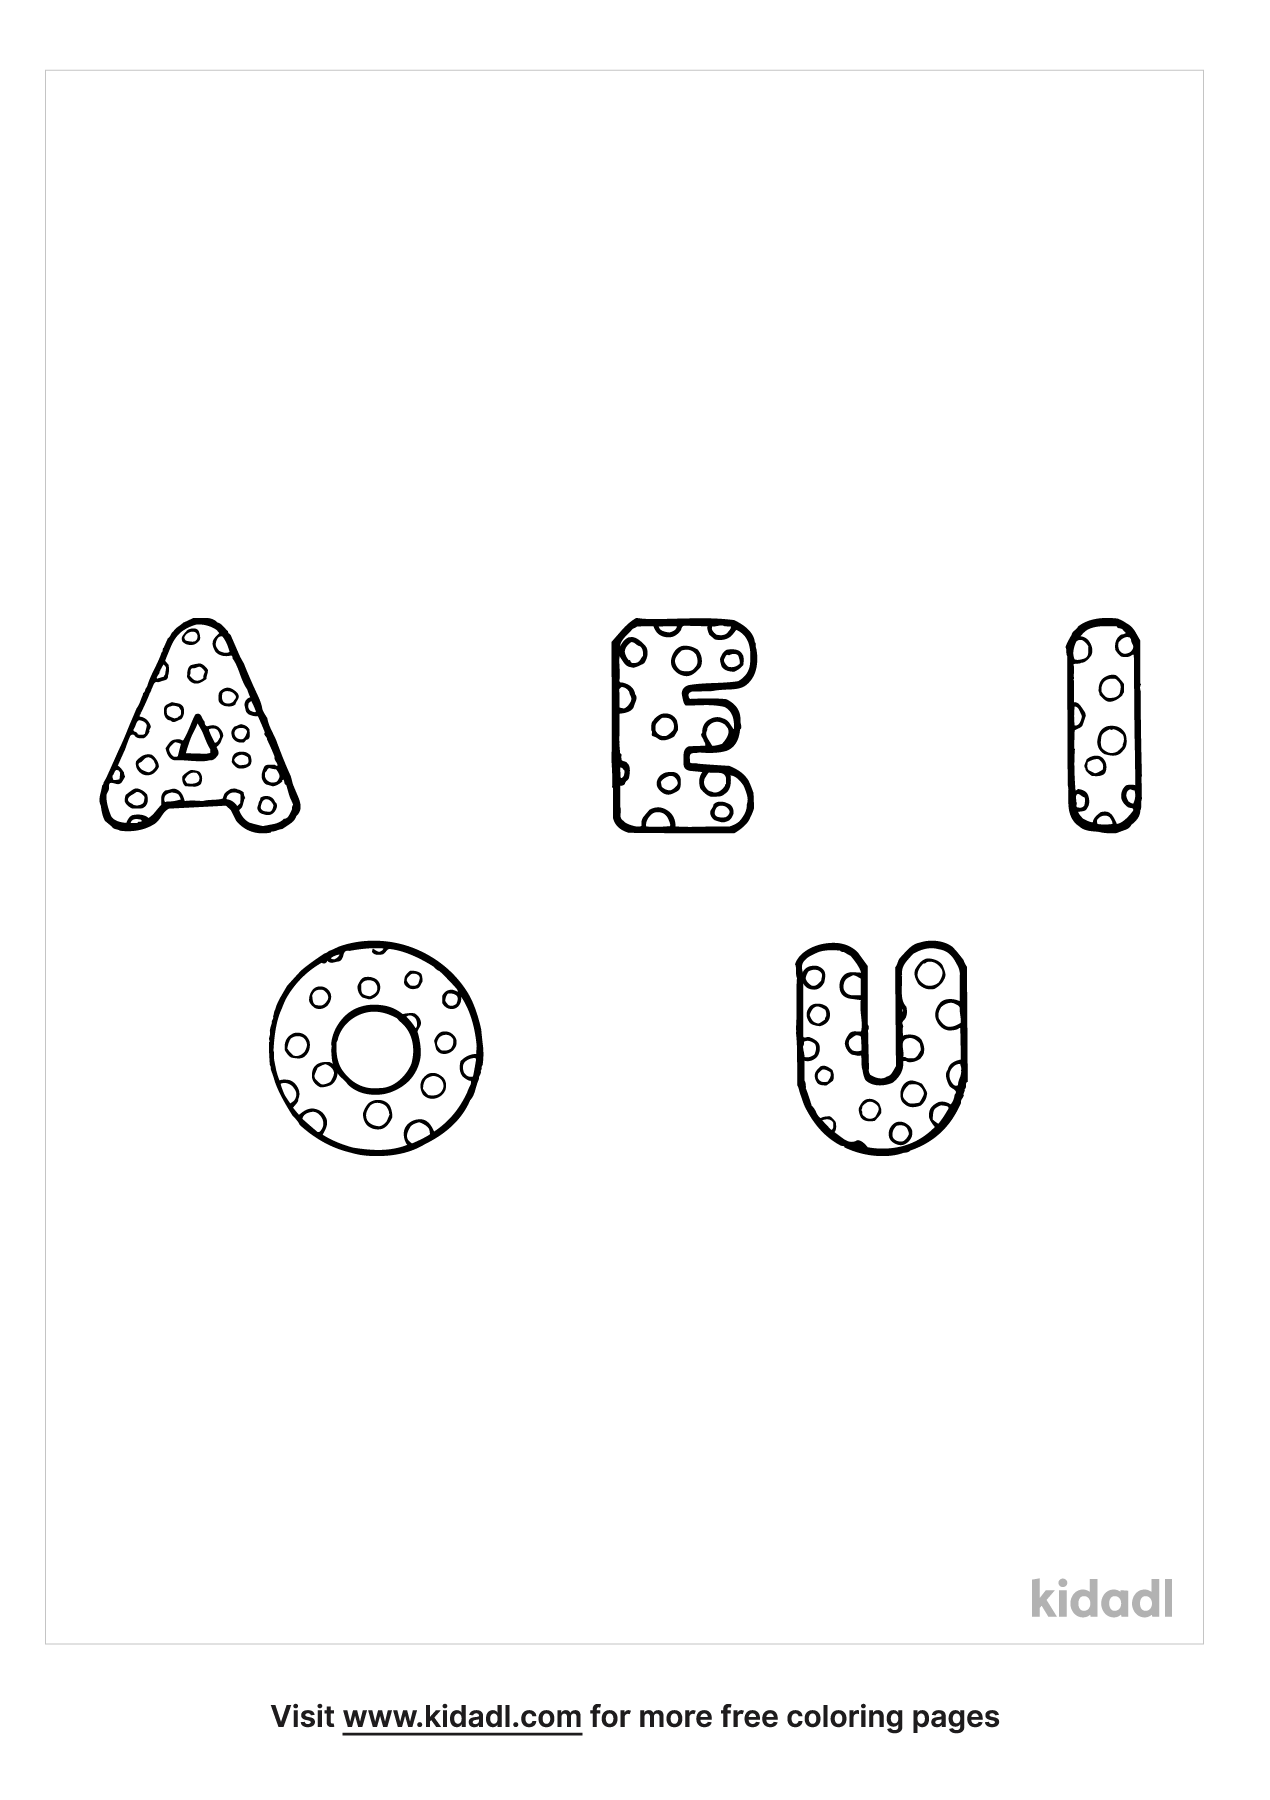 Vowel Coloring Pages | Free Letters Coloring Pages | Kidadl